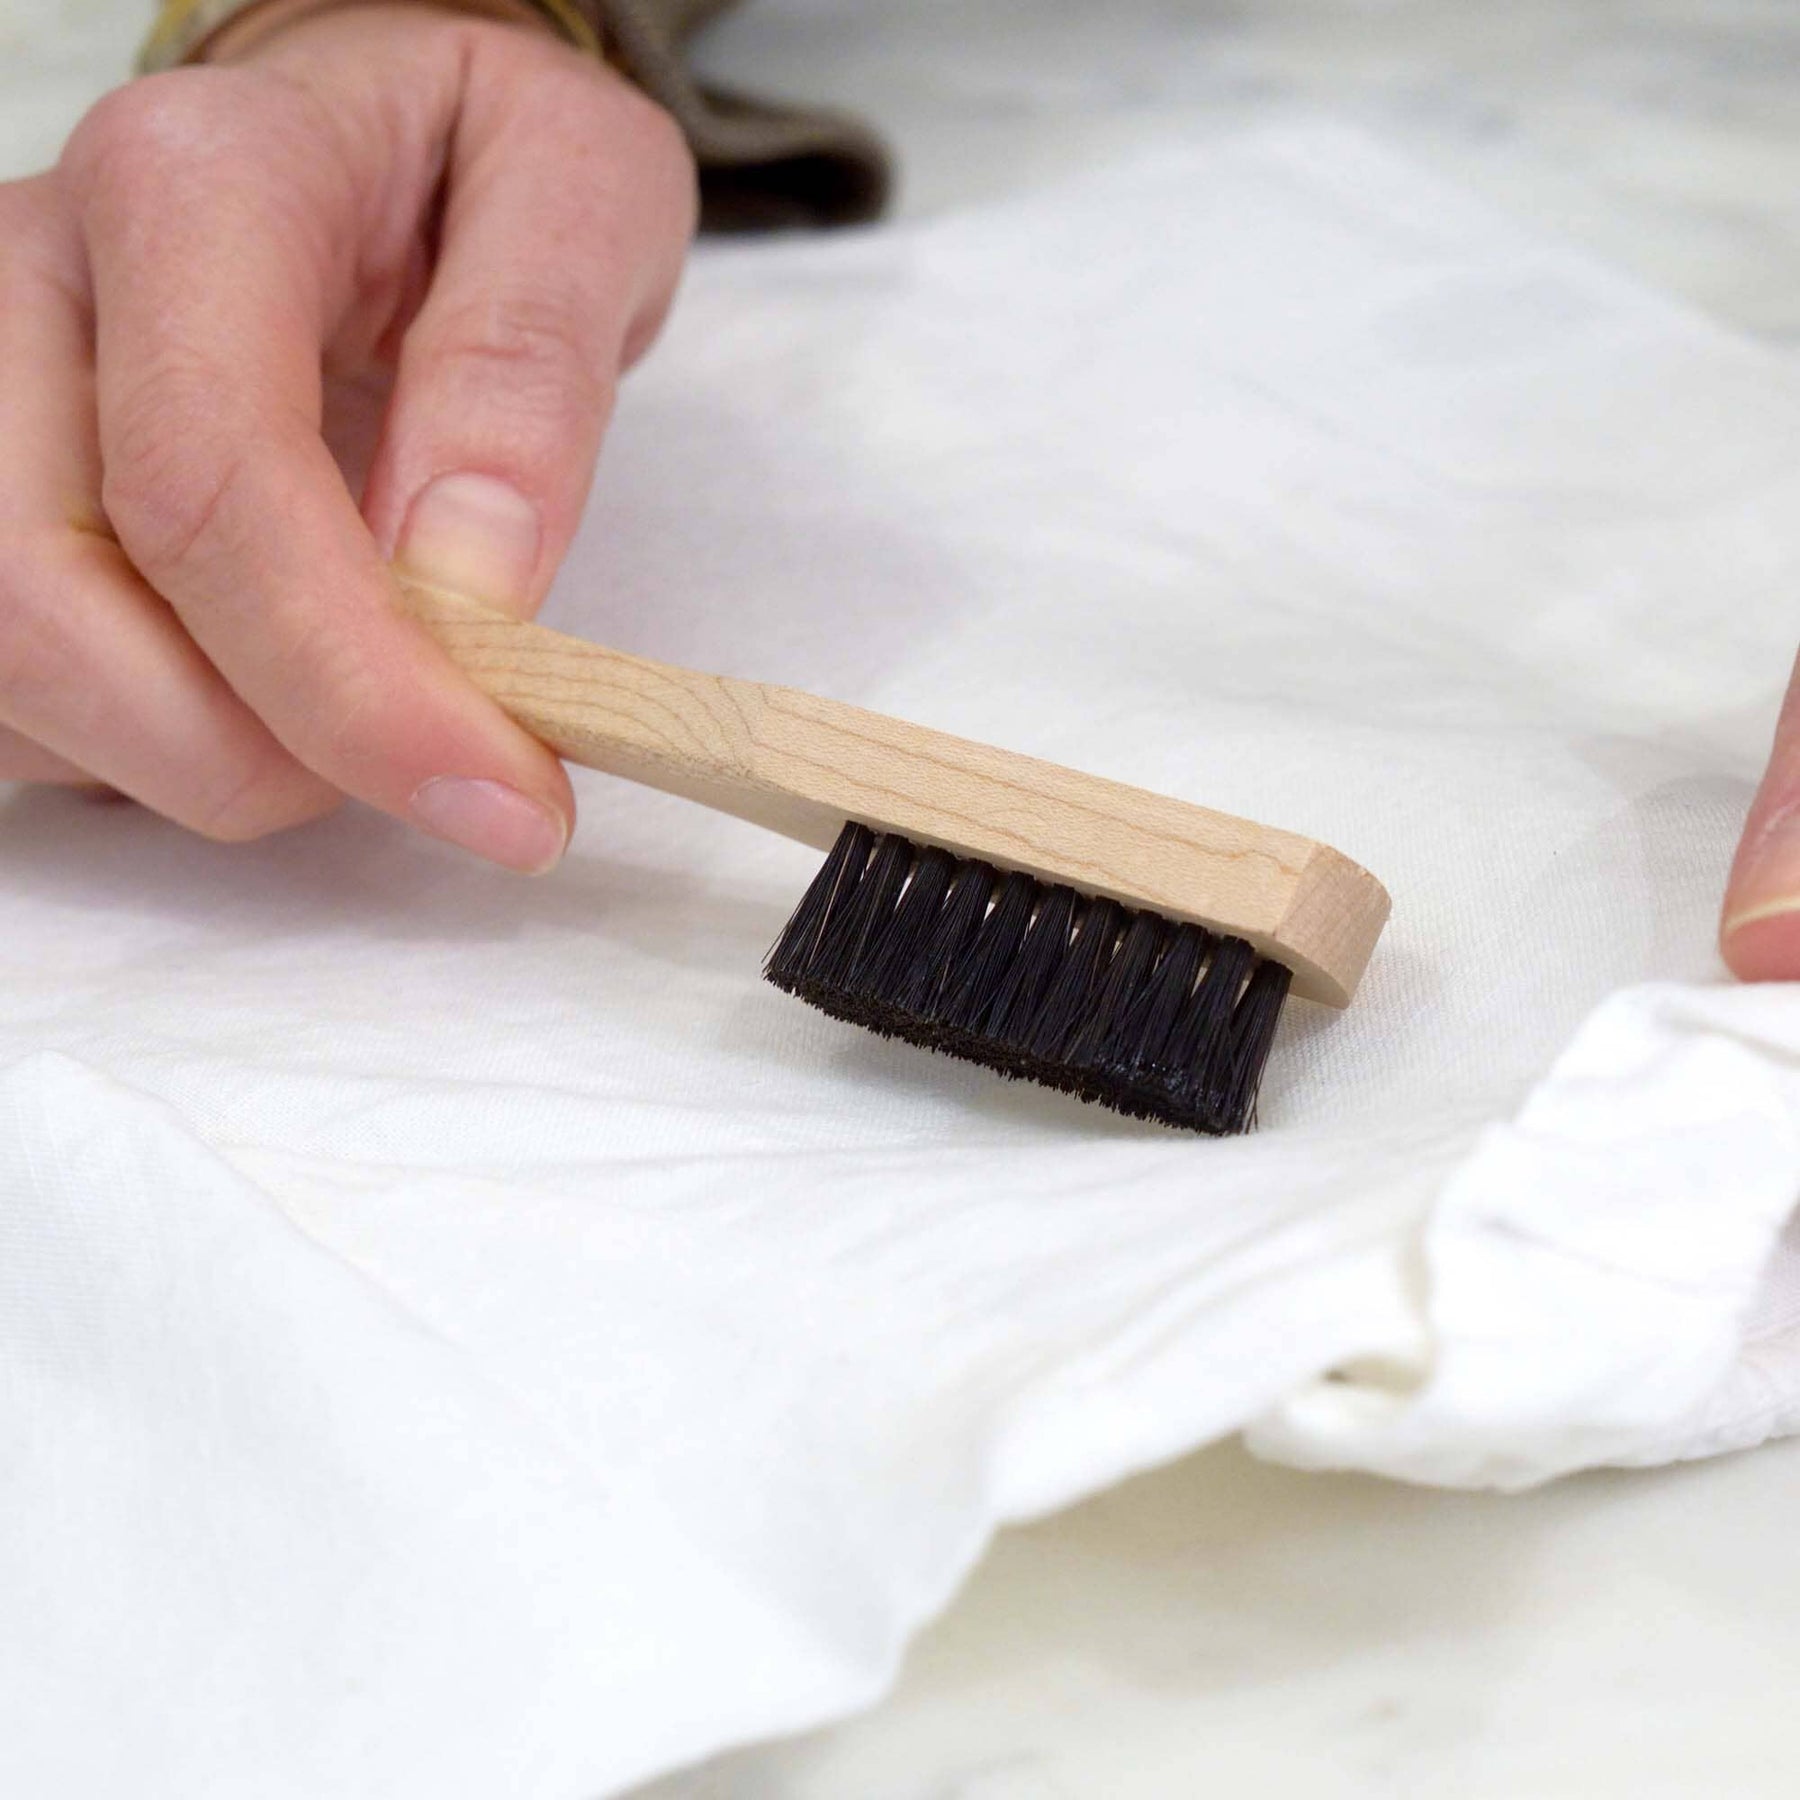 How to Clean Wood Stain From Brushes